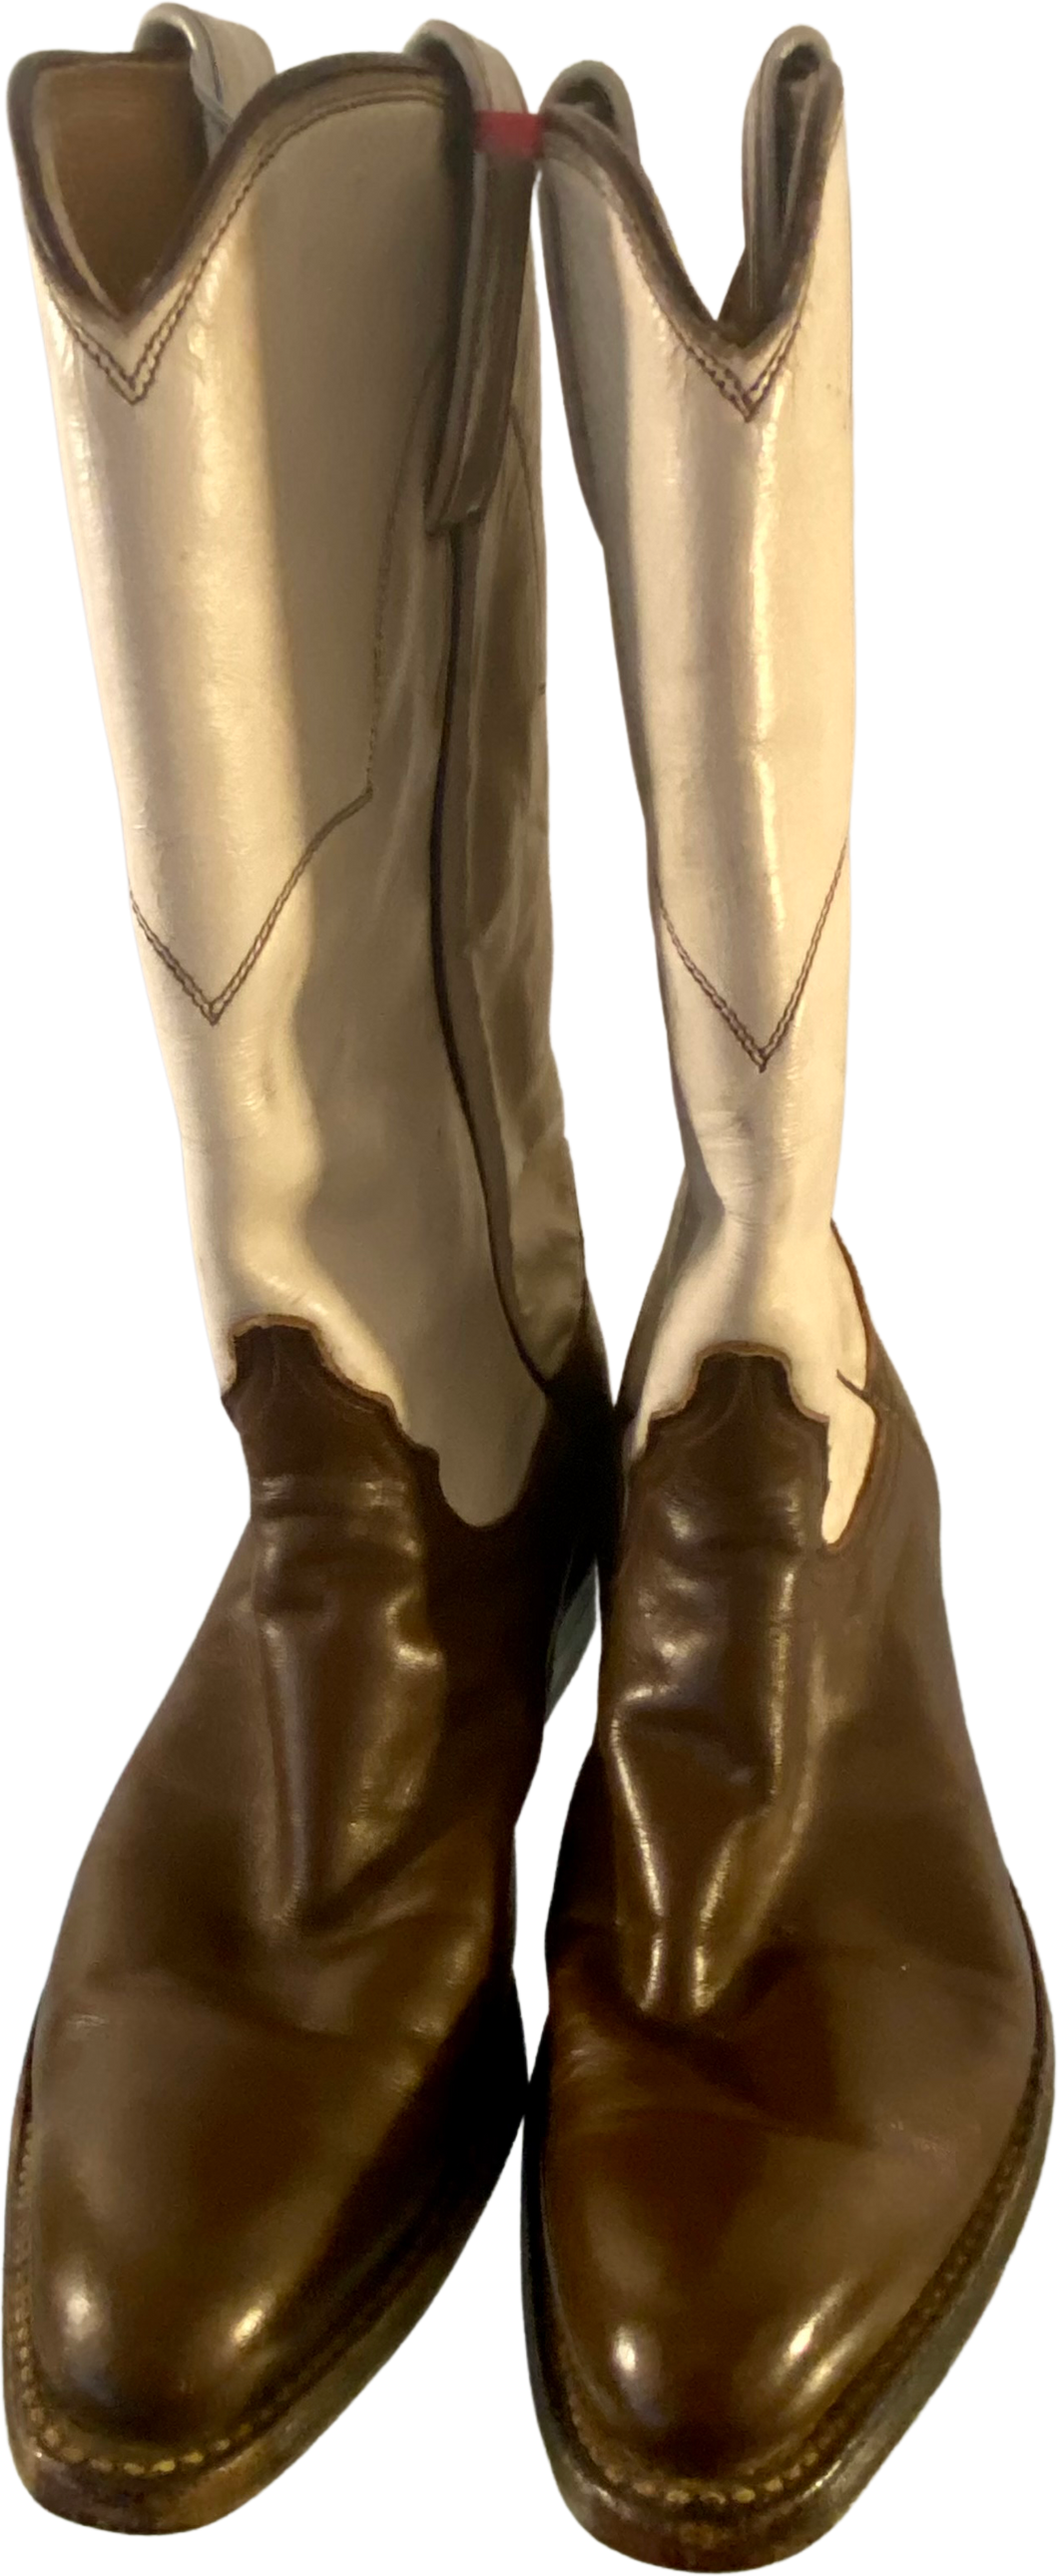 70s Rare Women's White And Brown Leather Cowboy Boots by Justin